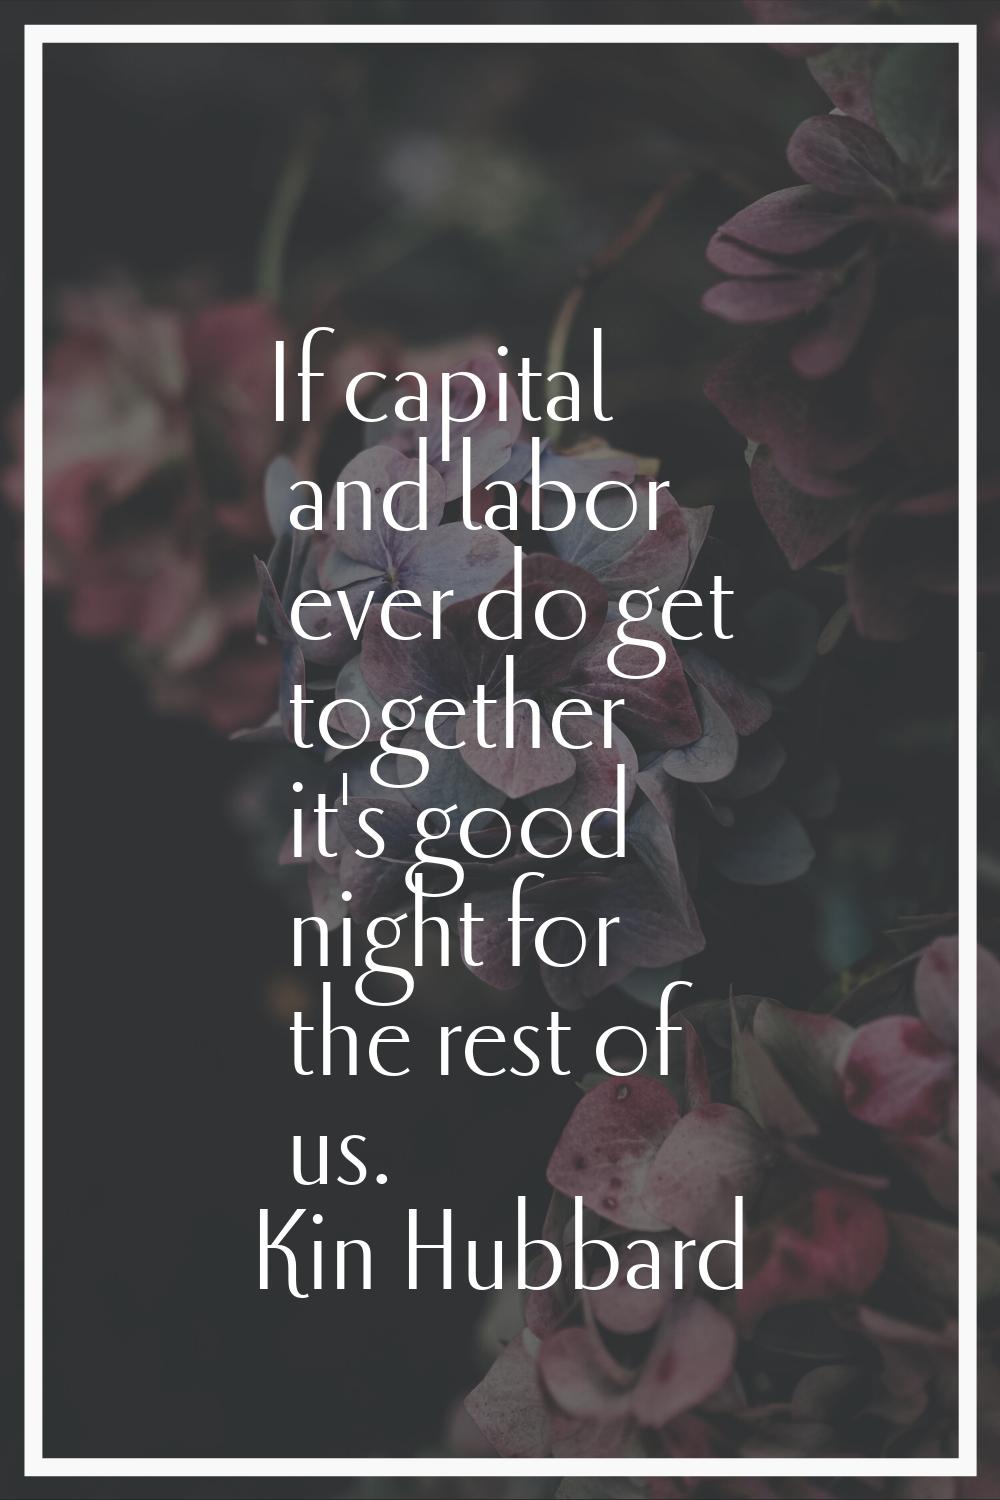 If capital and labor ever do get together it's good night for the rest of us.